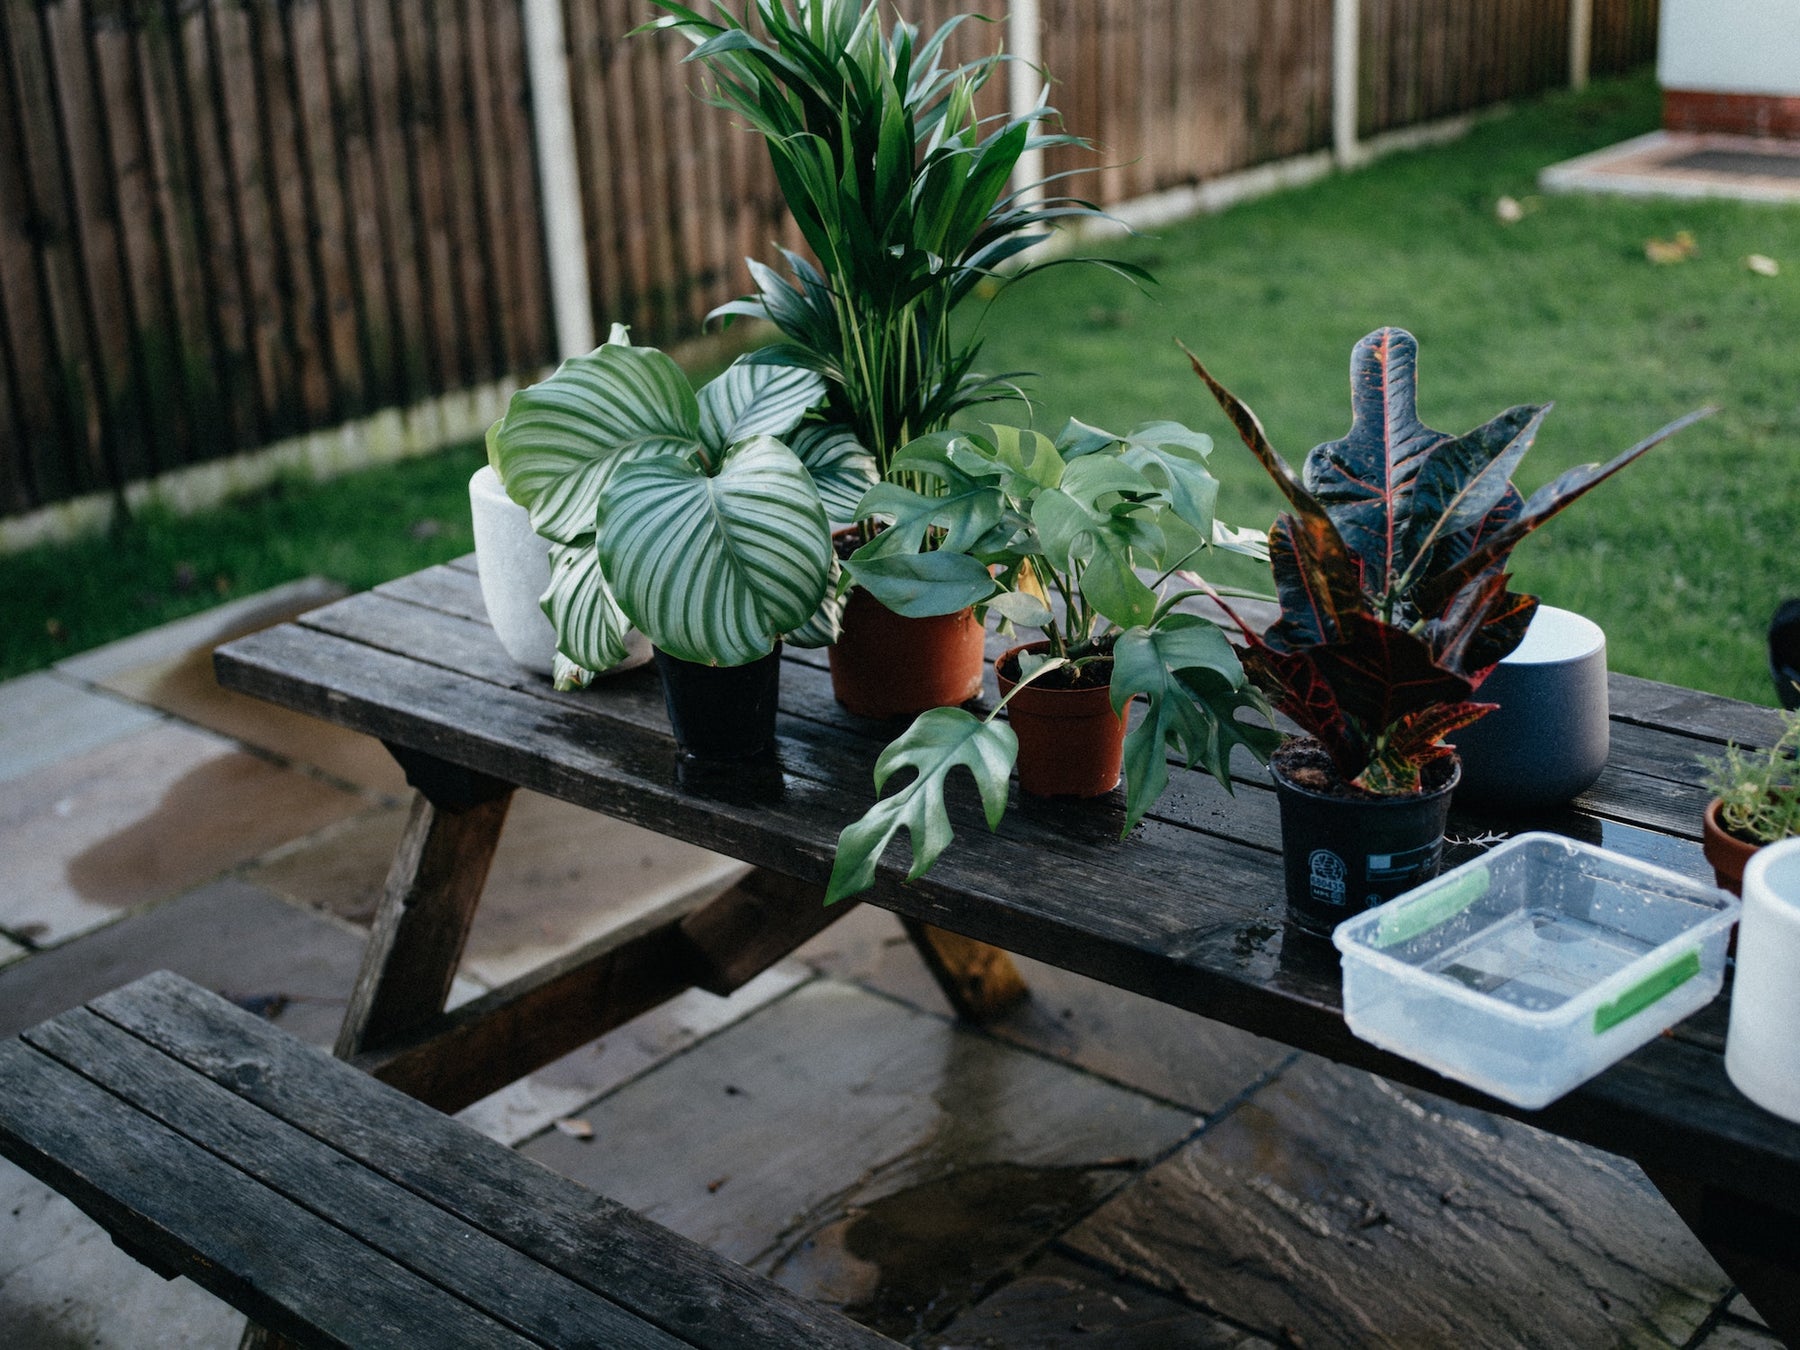 Plants & Aromatherapy: Can Essential Oils Harm Your Leafy Friends?